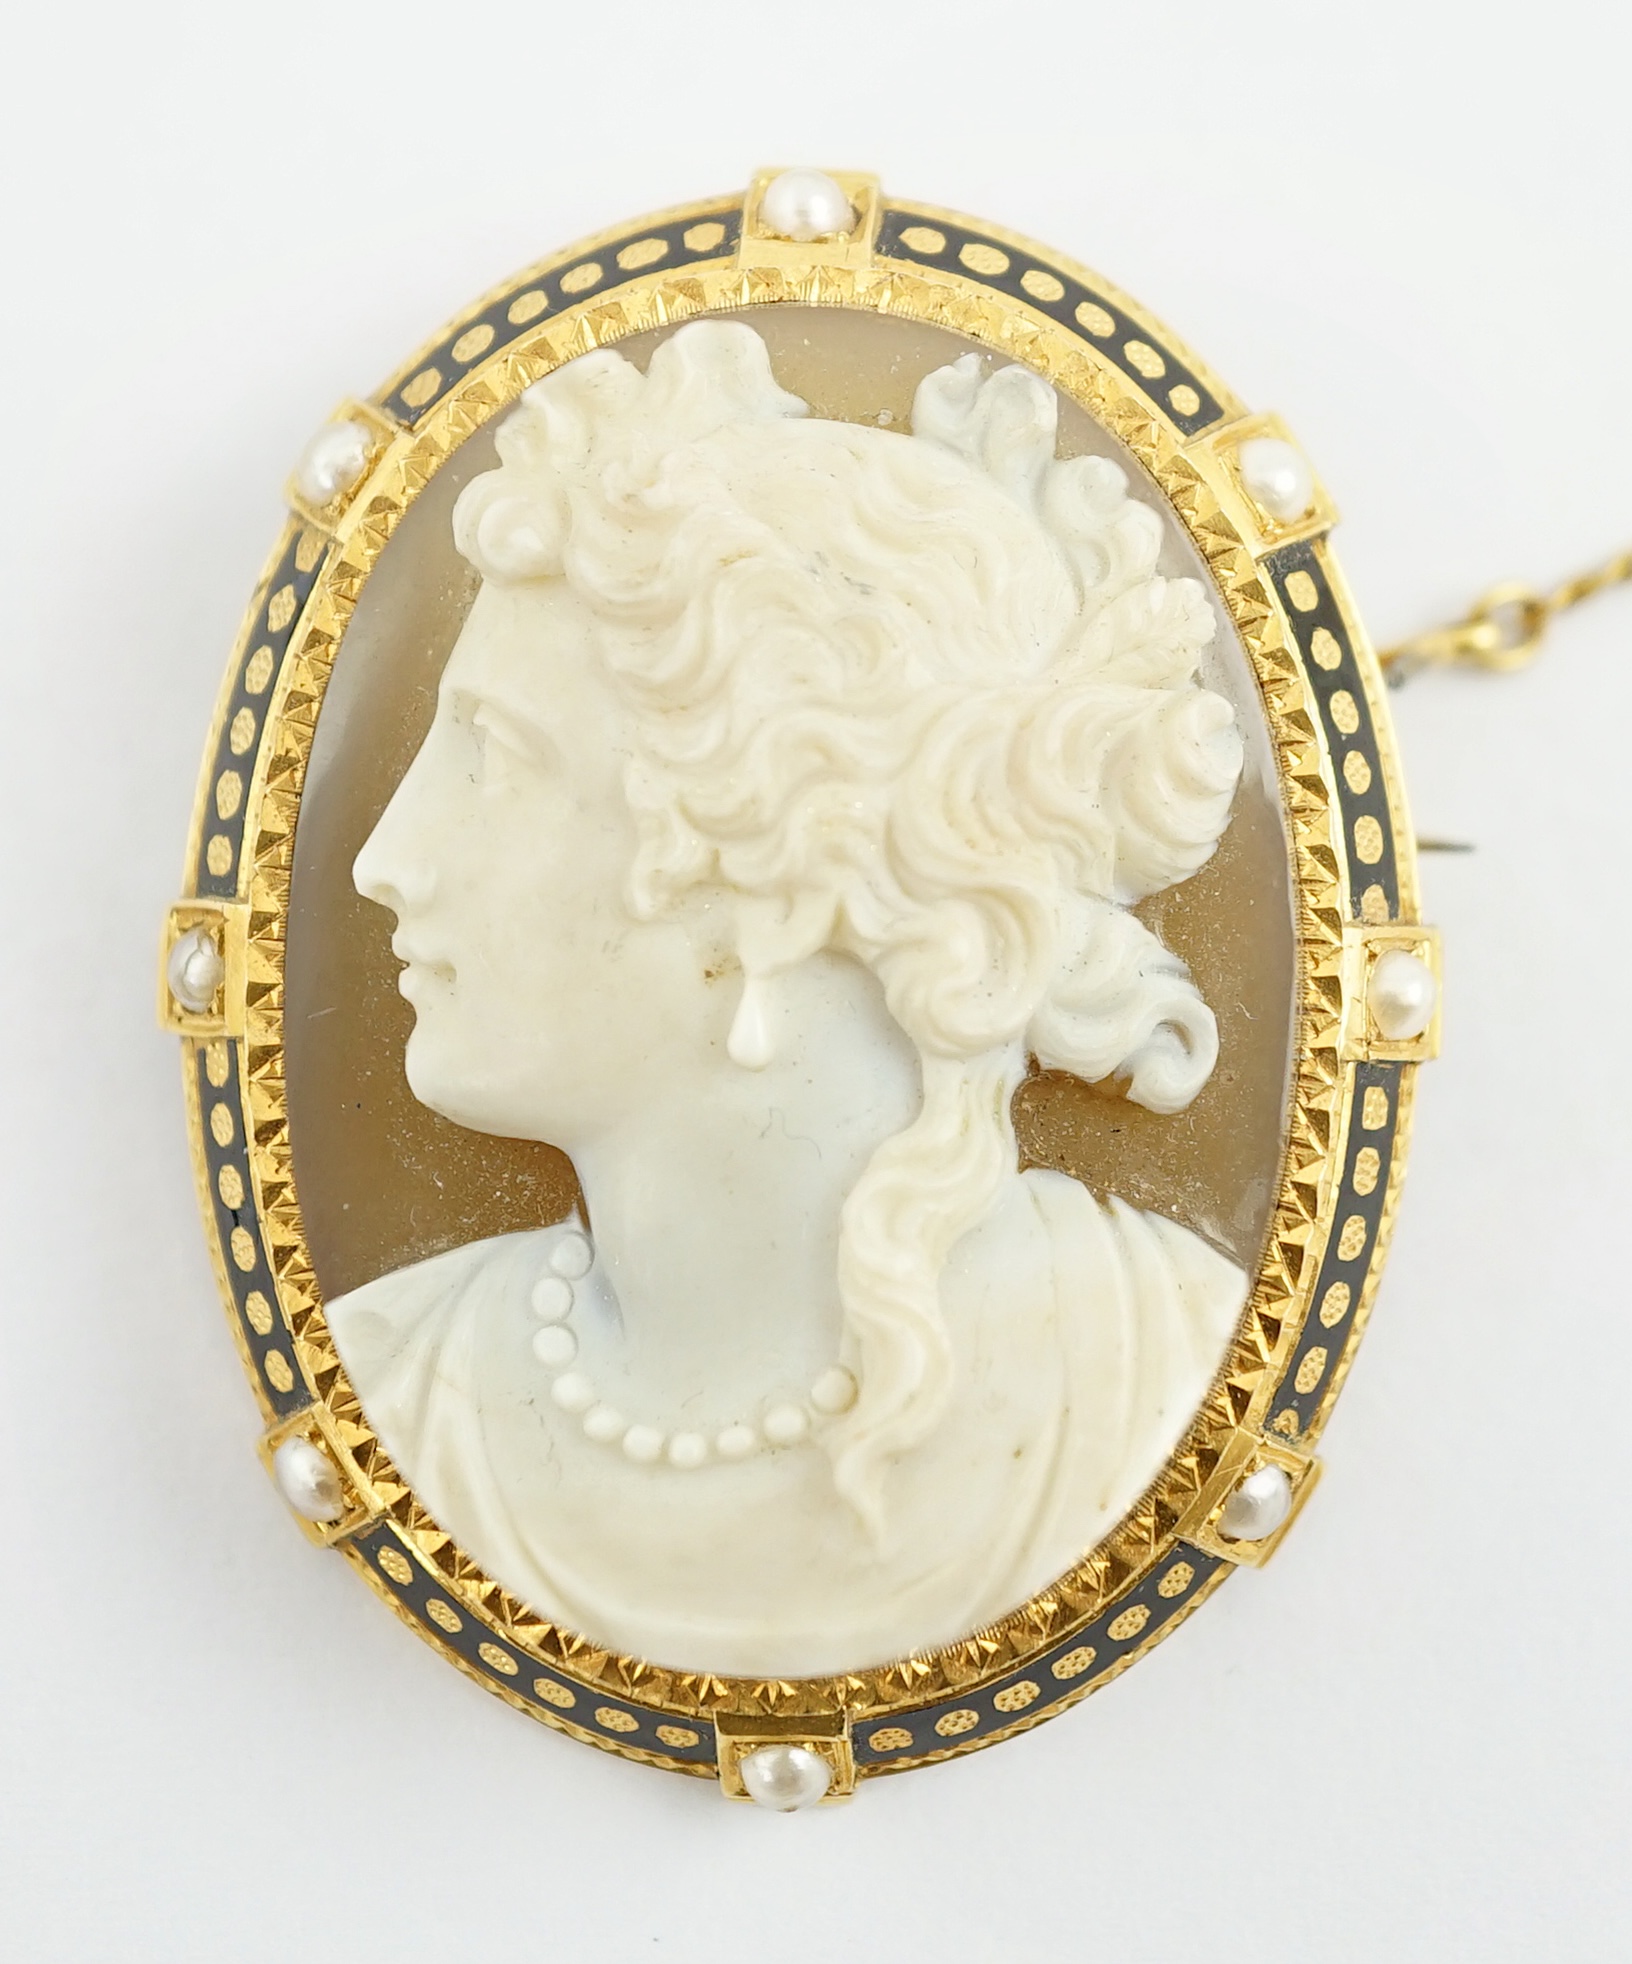 A Victorian gold, enamel and seed pearl mounted oval cameo hardstone brooch